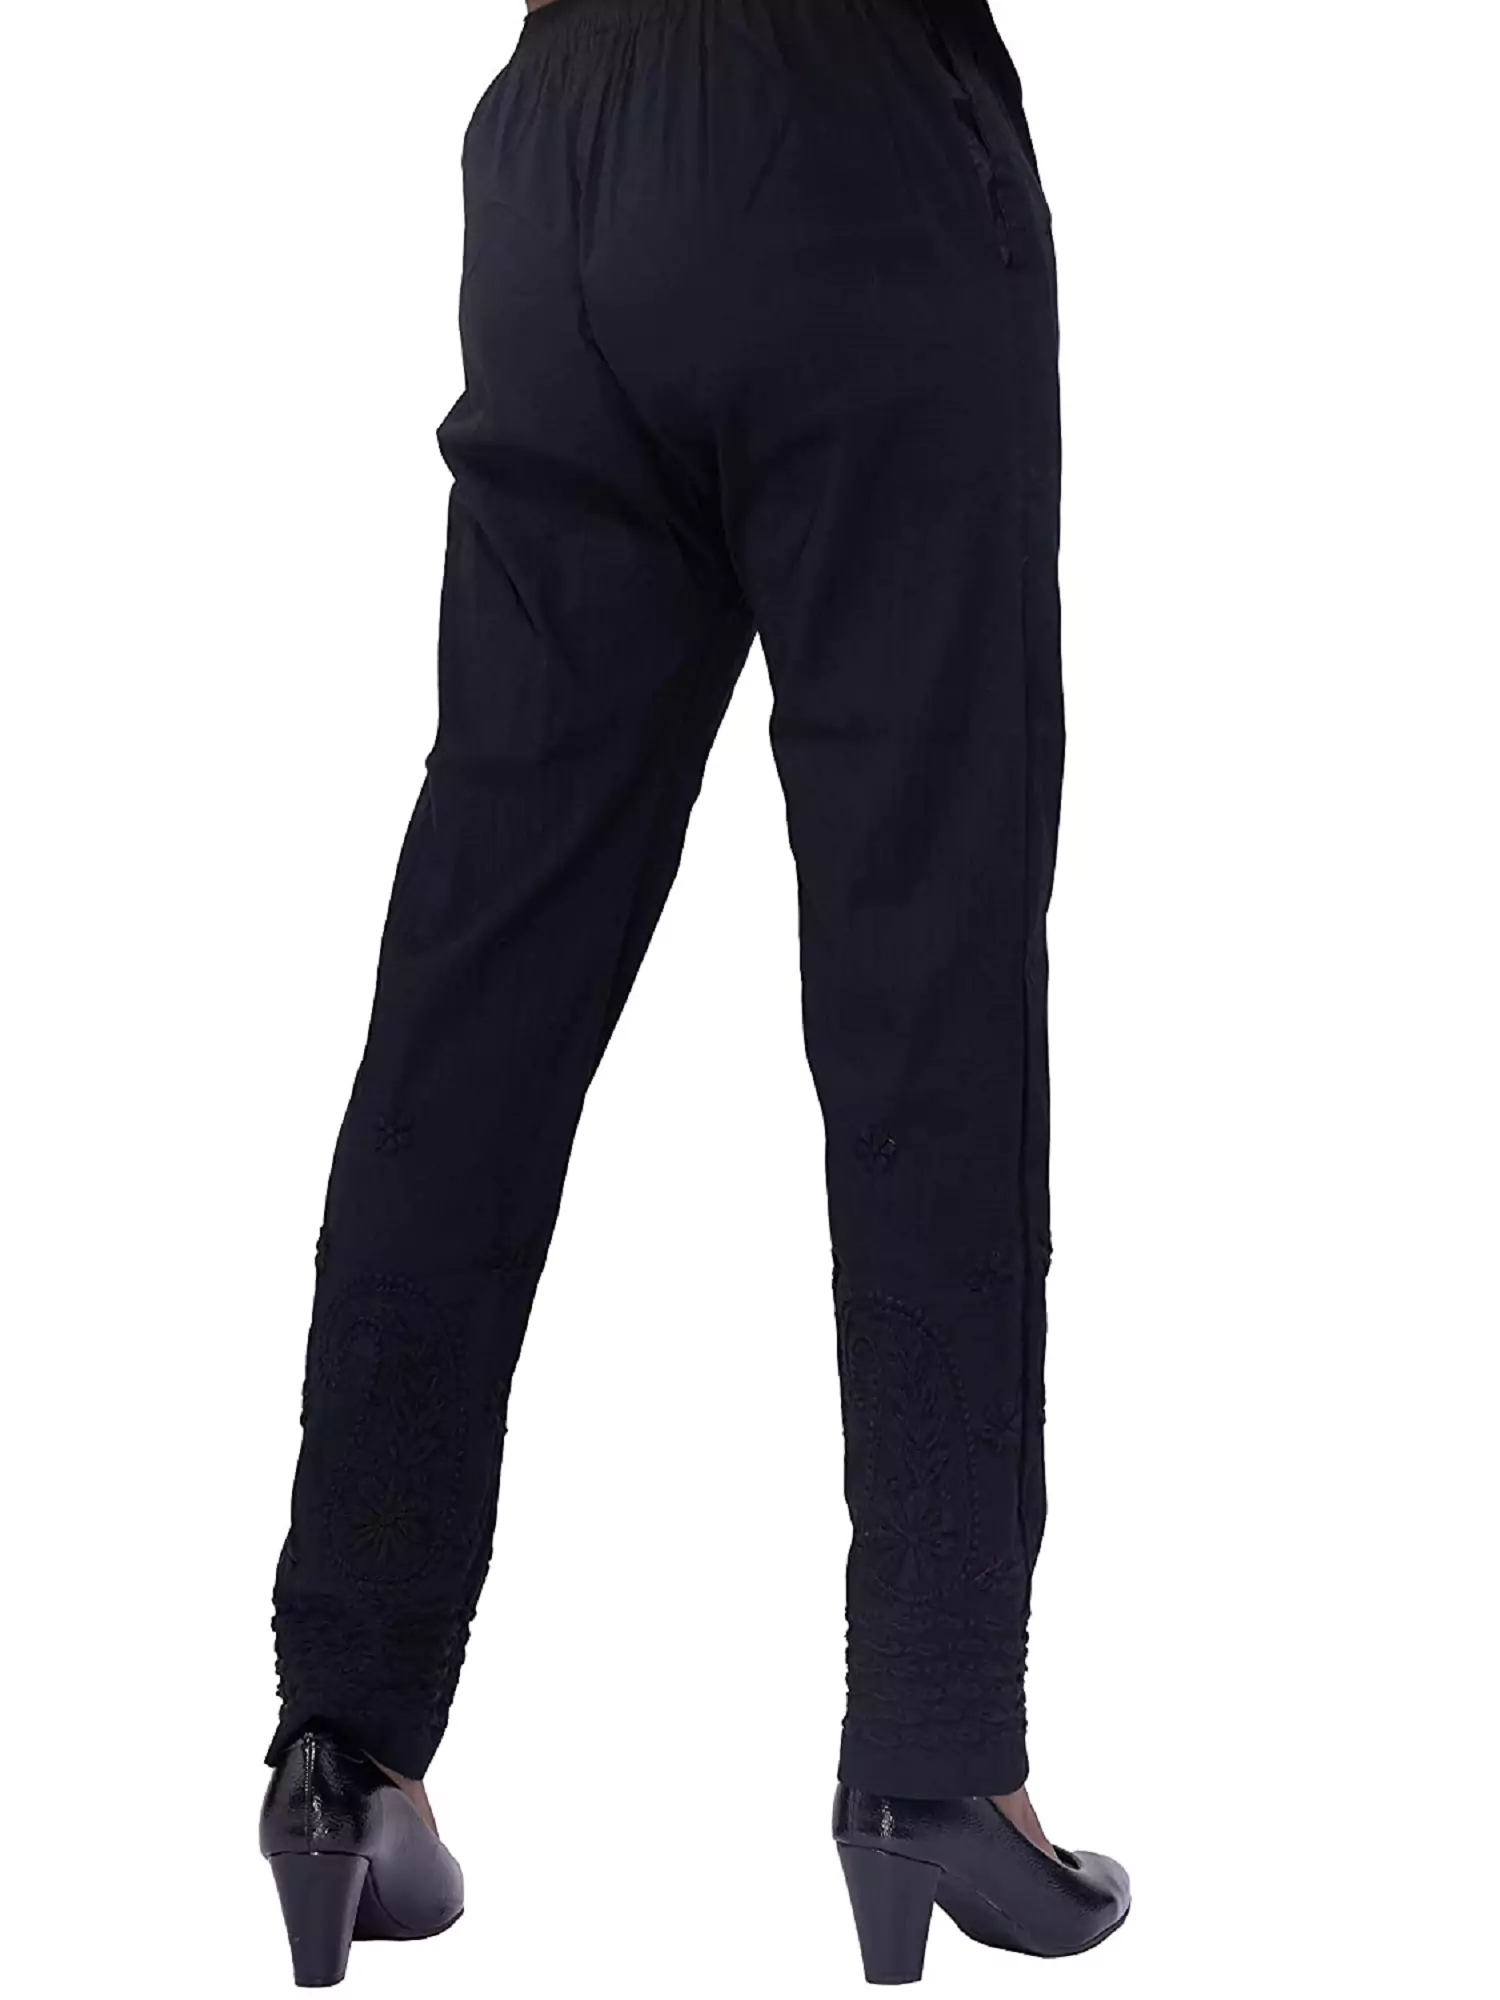 Lavangi Lucknow Chikan Black Cotton Stretchable Trousers